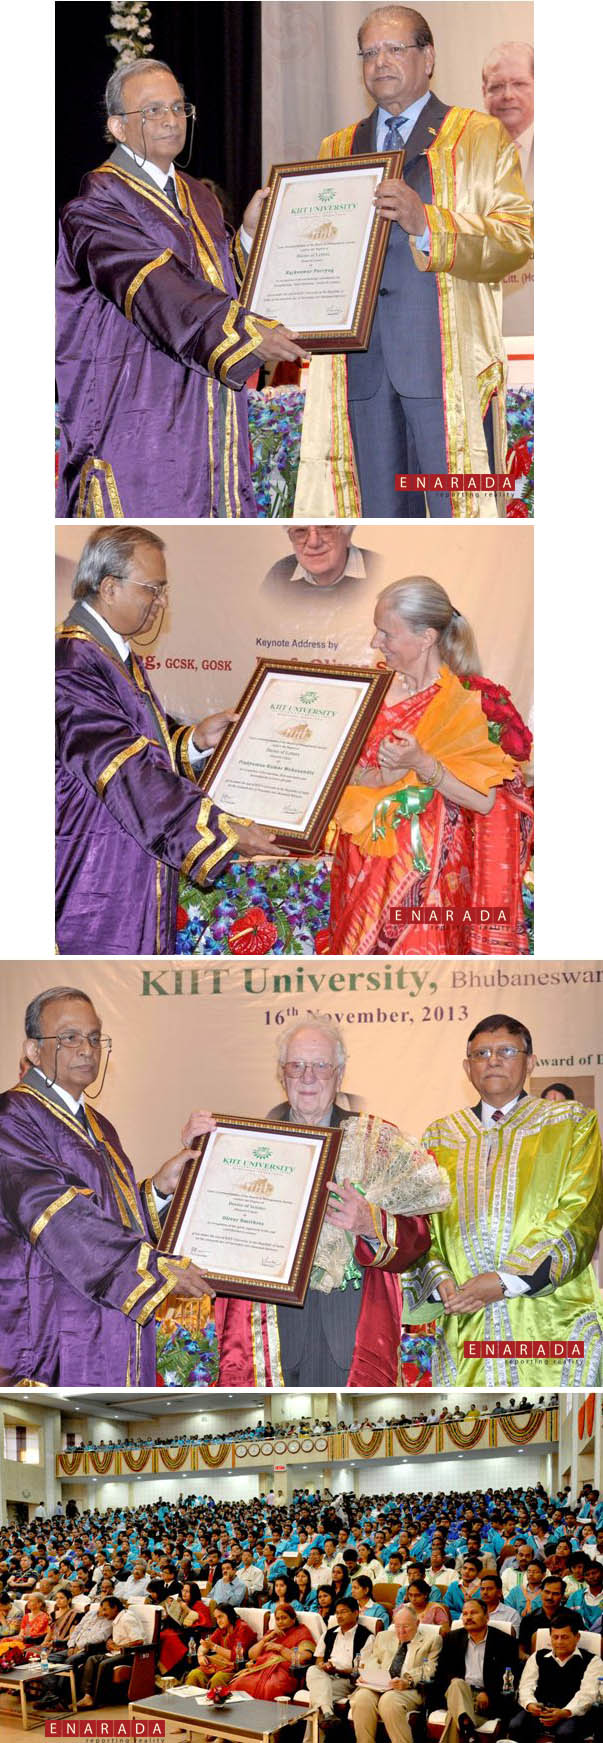 From top to Bottom: KIIT University conferred Honoris Causa Degrees of D.Litt.  on Mr. Purryag, D.Sc on  Prof. Smithies. Dr. Pradyumna Kumar Mahanandia, Eminent Artist, Sweden was also conferred degrees of D.Litt. (Honoris Causa) on the occasion. The honour was conferred in absentia and received by his wife Mrs. Ann-Charlotte Mahanandia, on his behalf. Founder of KIIT & KISS, Achyuta Samanta seated among audience